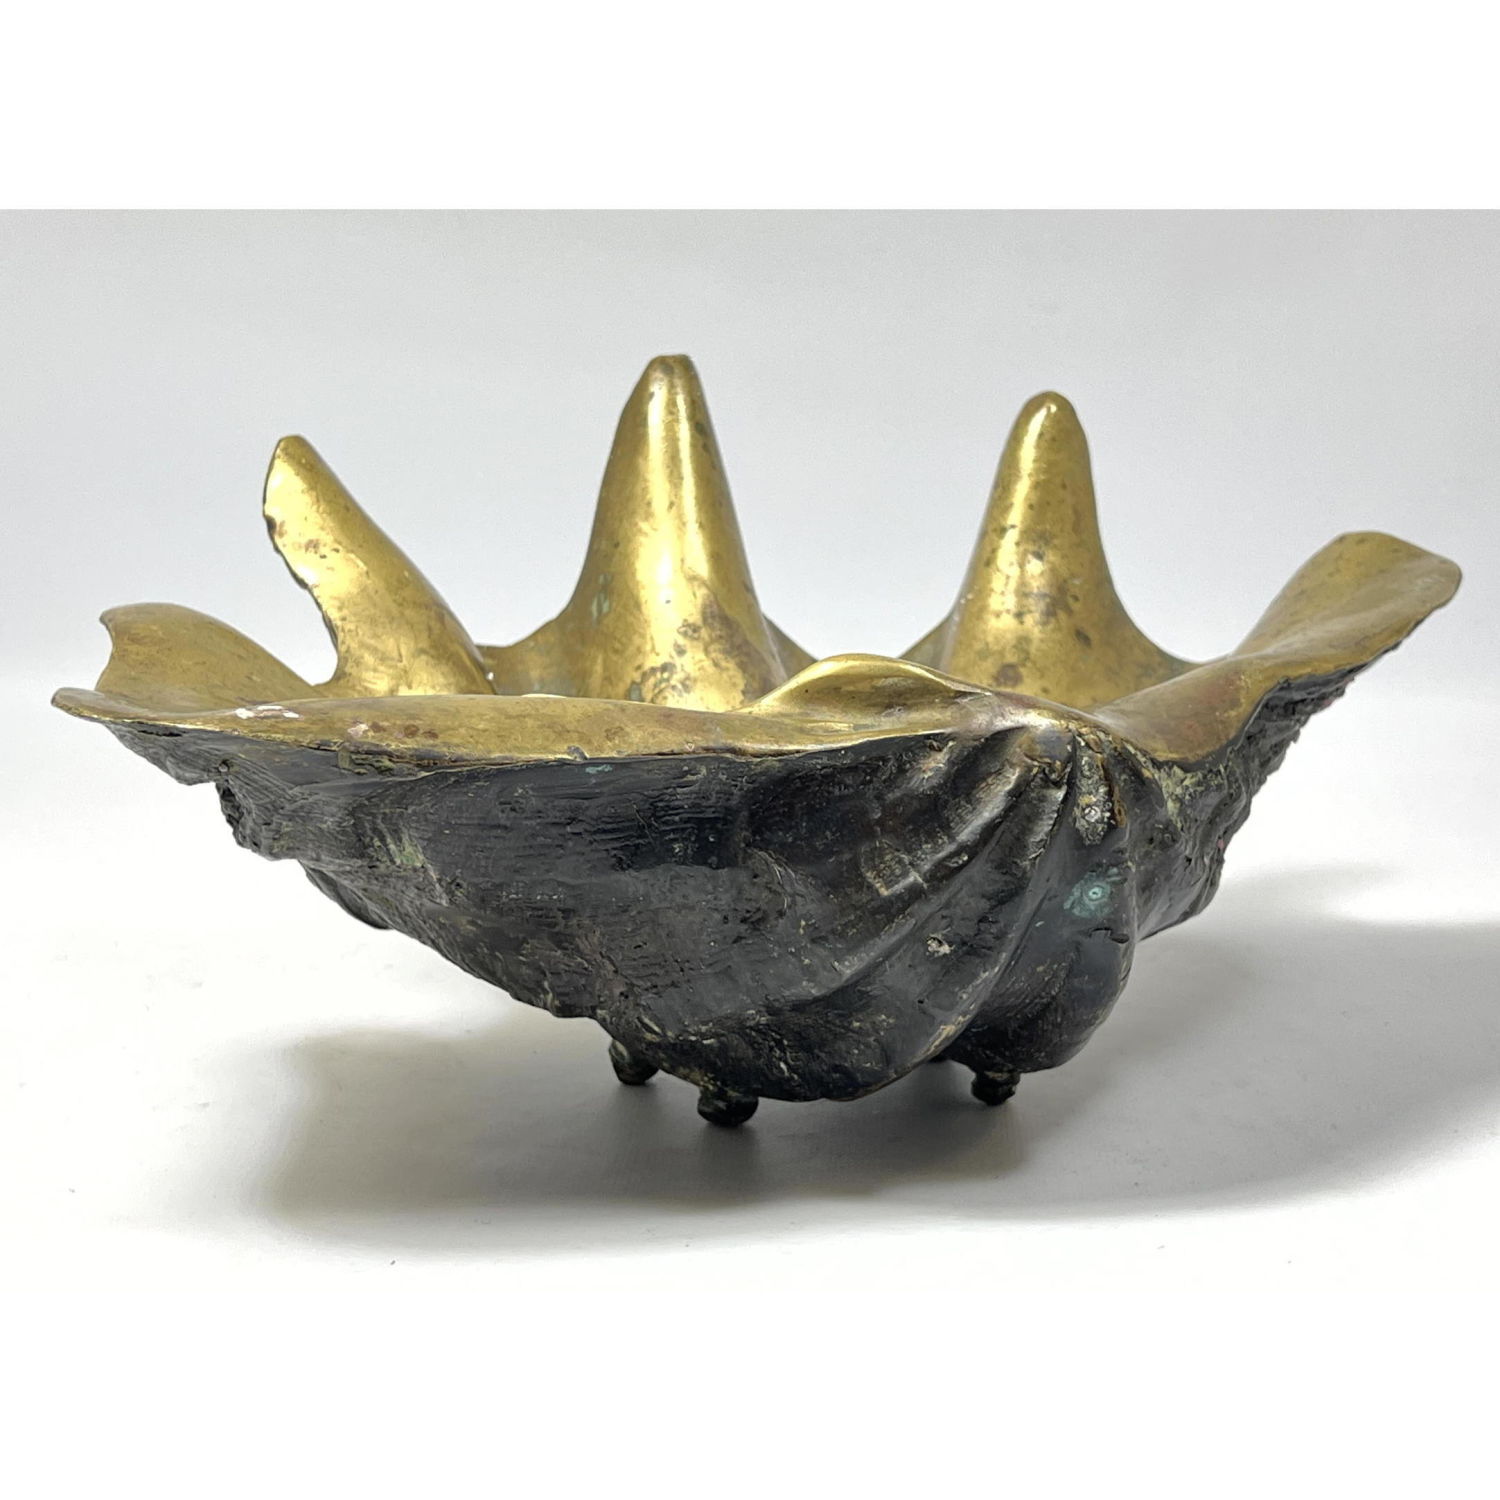 Large 13" Brass Giant Clam Shell.